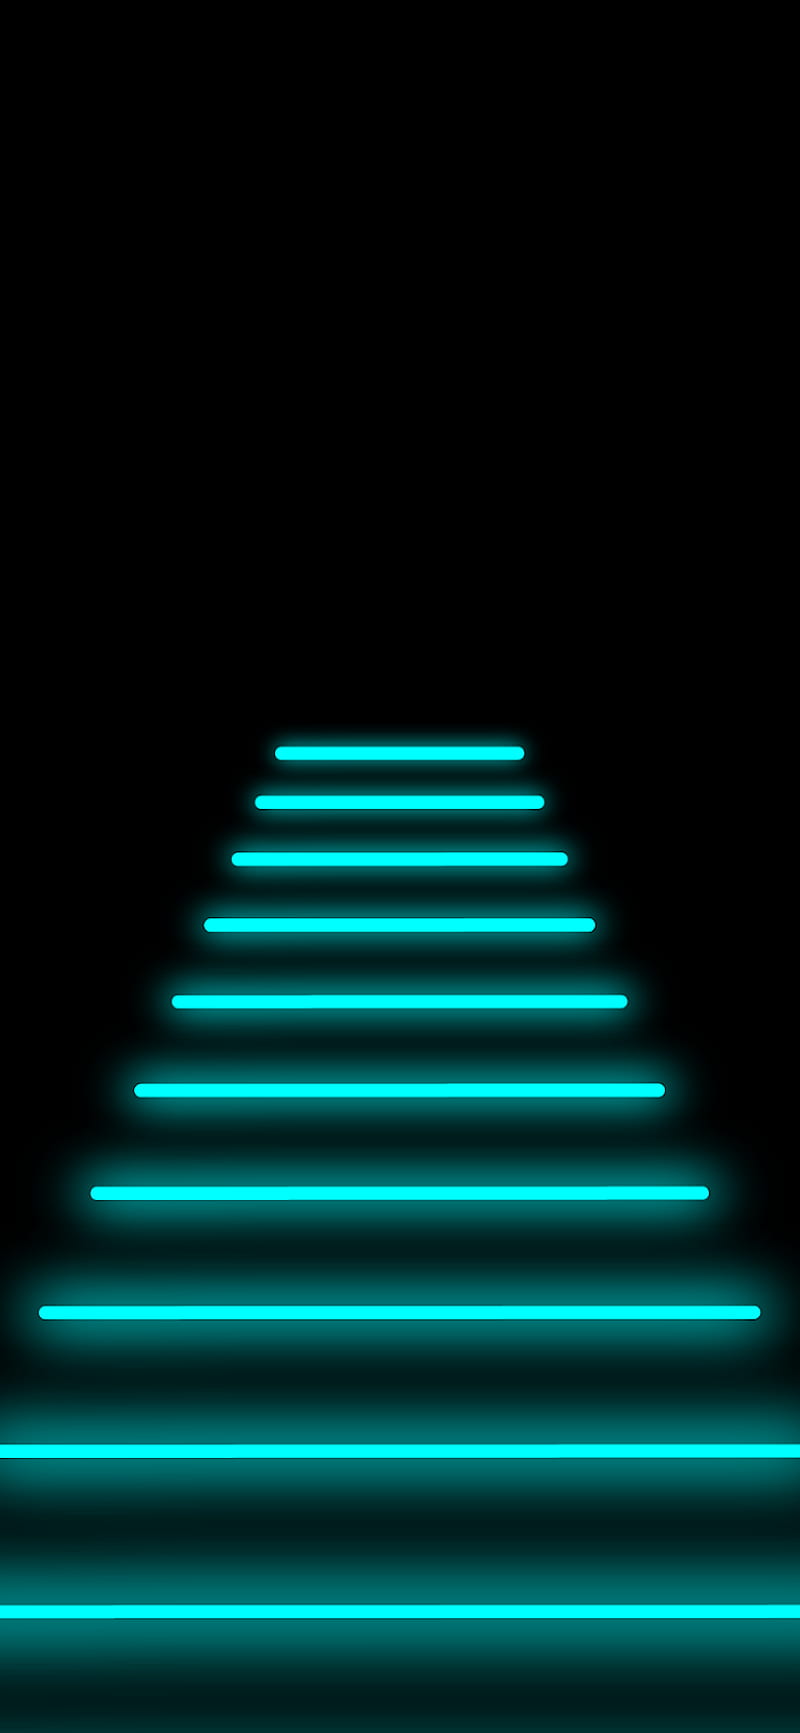 Oled background neon lines. ize. Black phone , Black , Background, Teal Neon, HD phone wallpaper